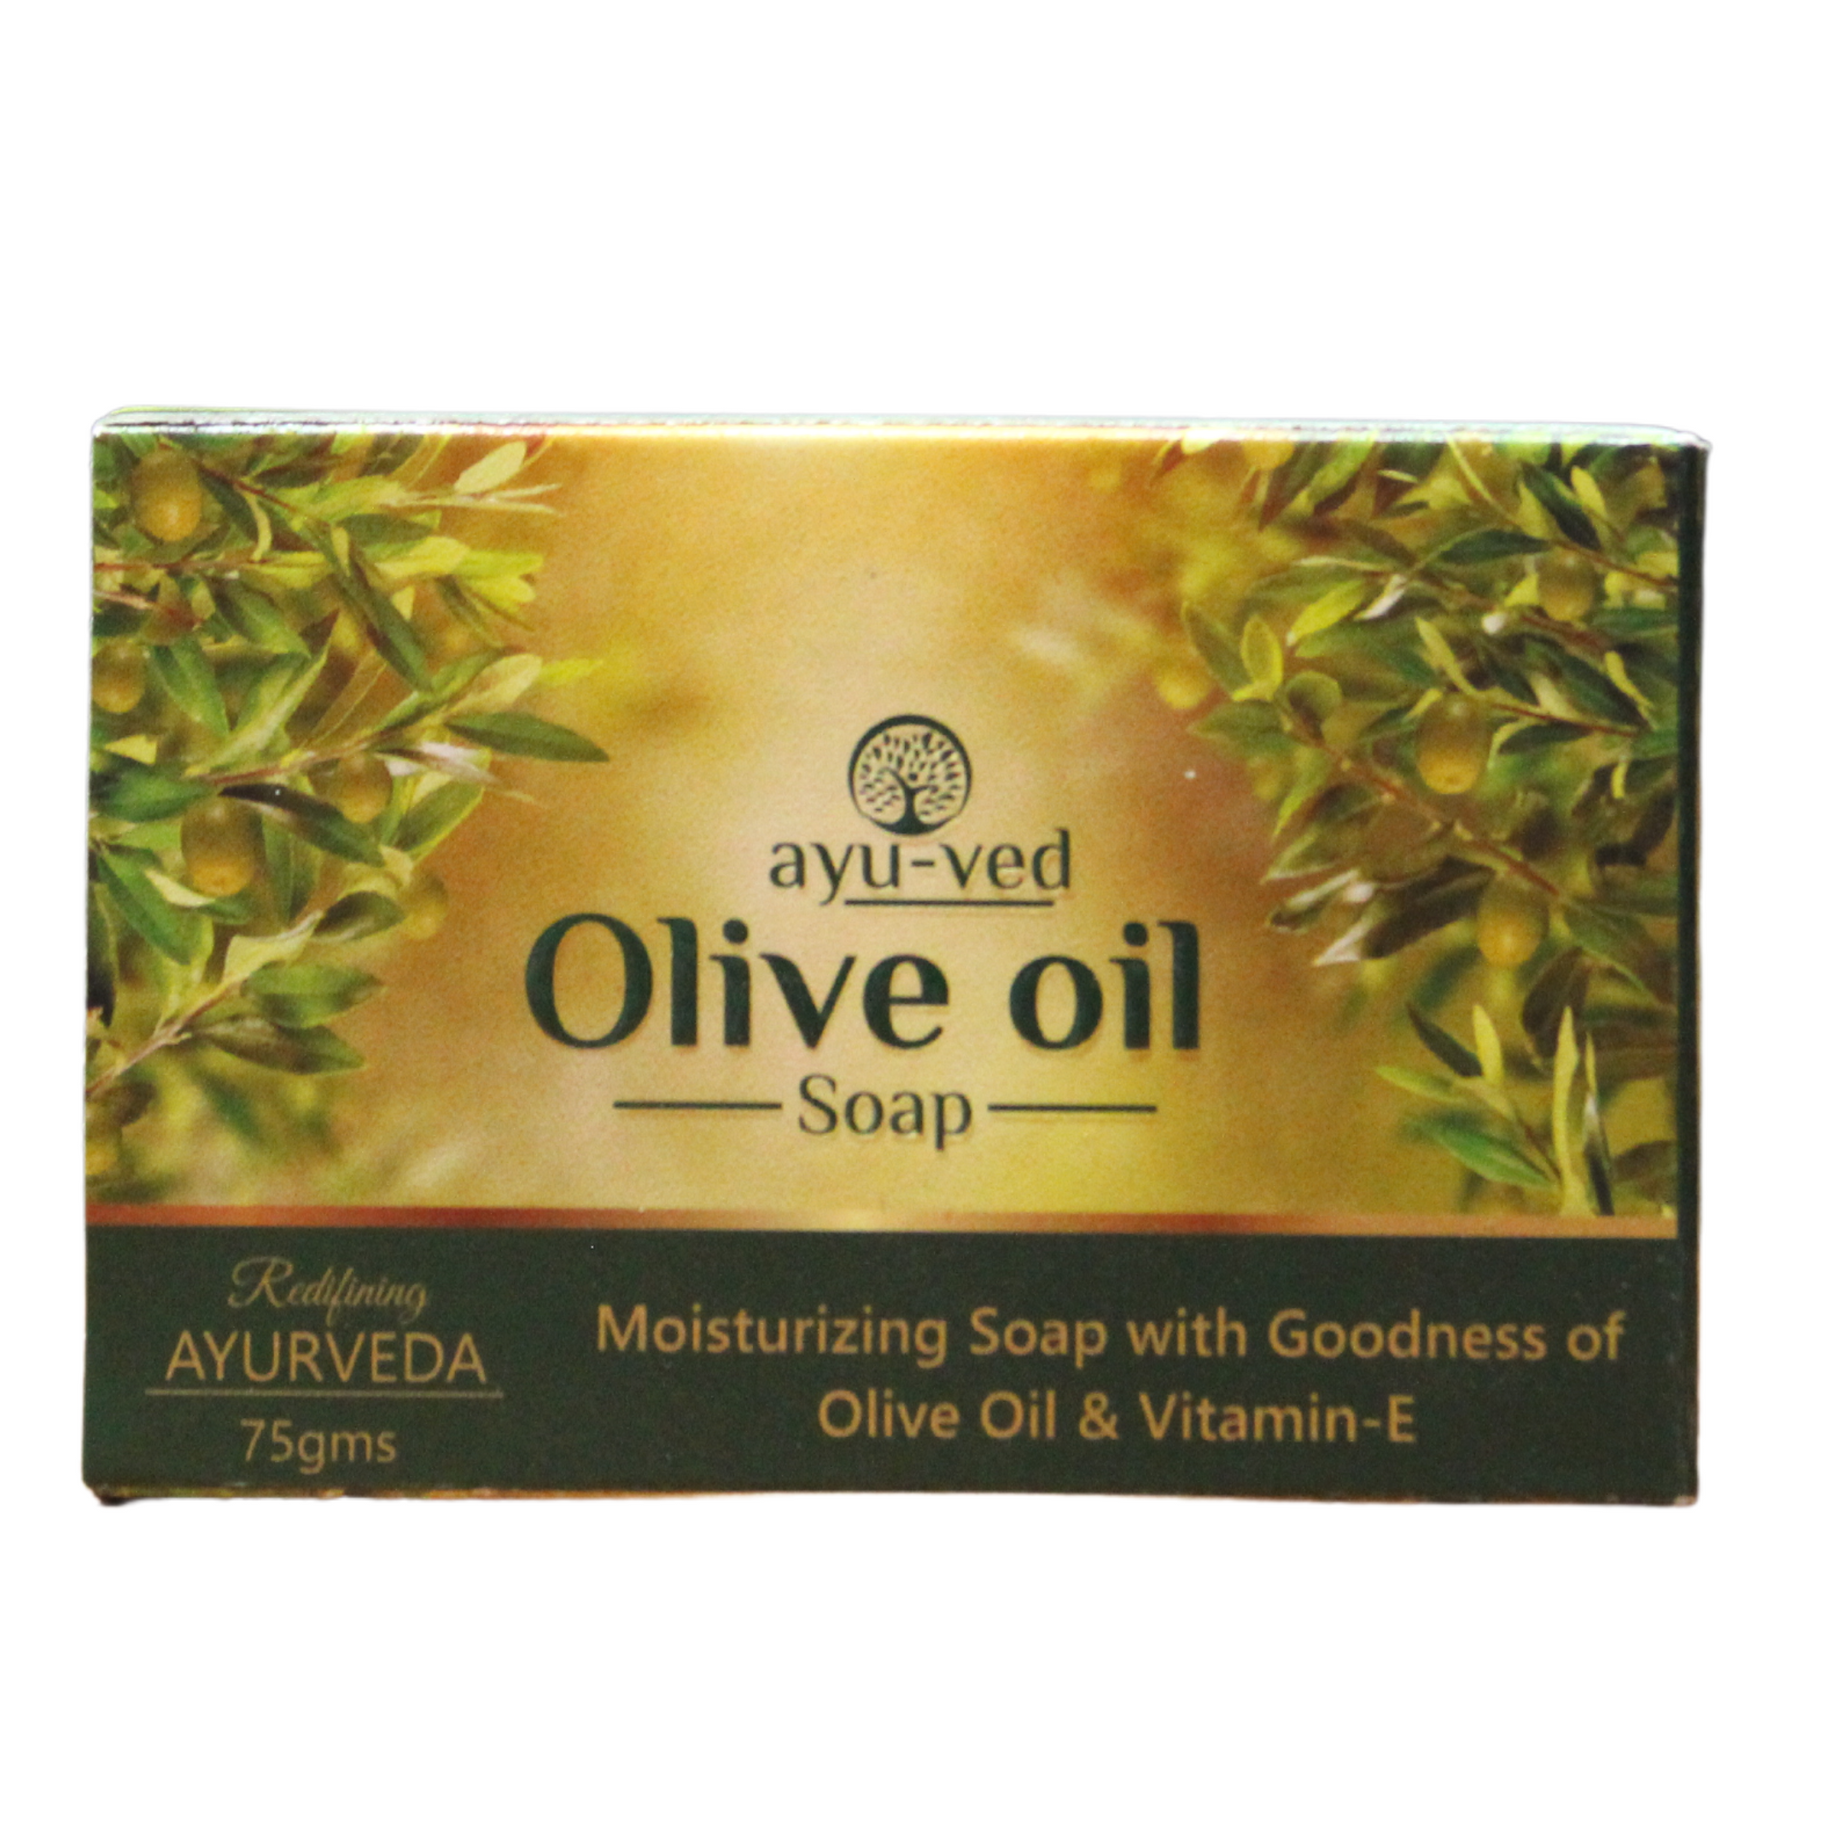 Shop Olive Oil Soap 75gm at price 72.00 from Ayuved Online - Ayush Care